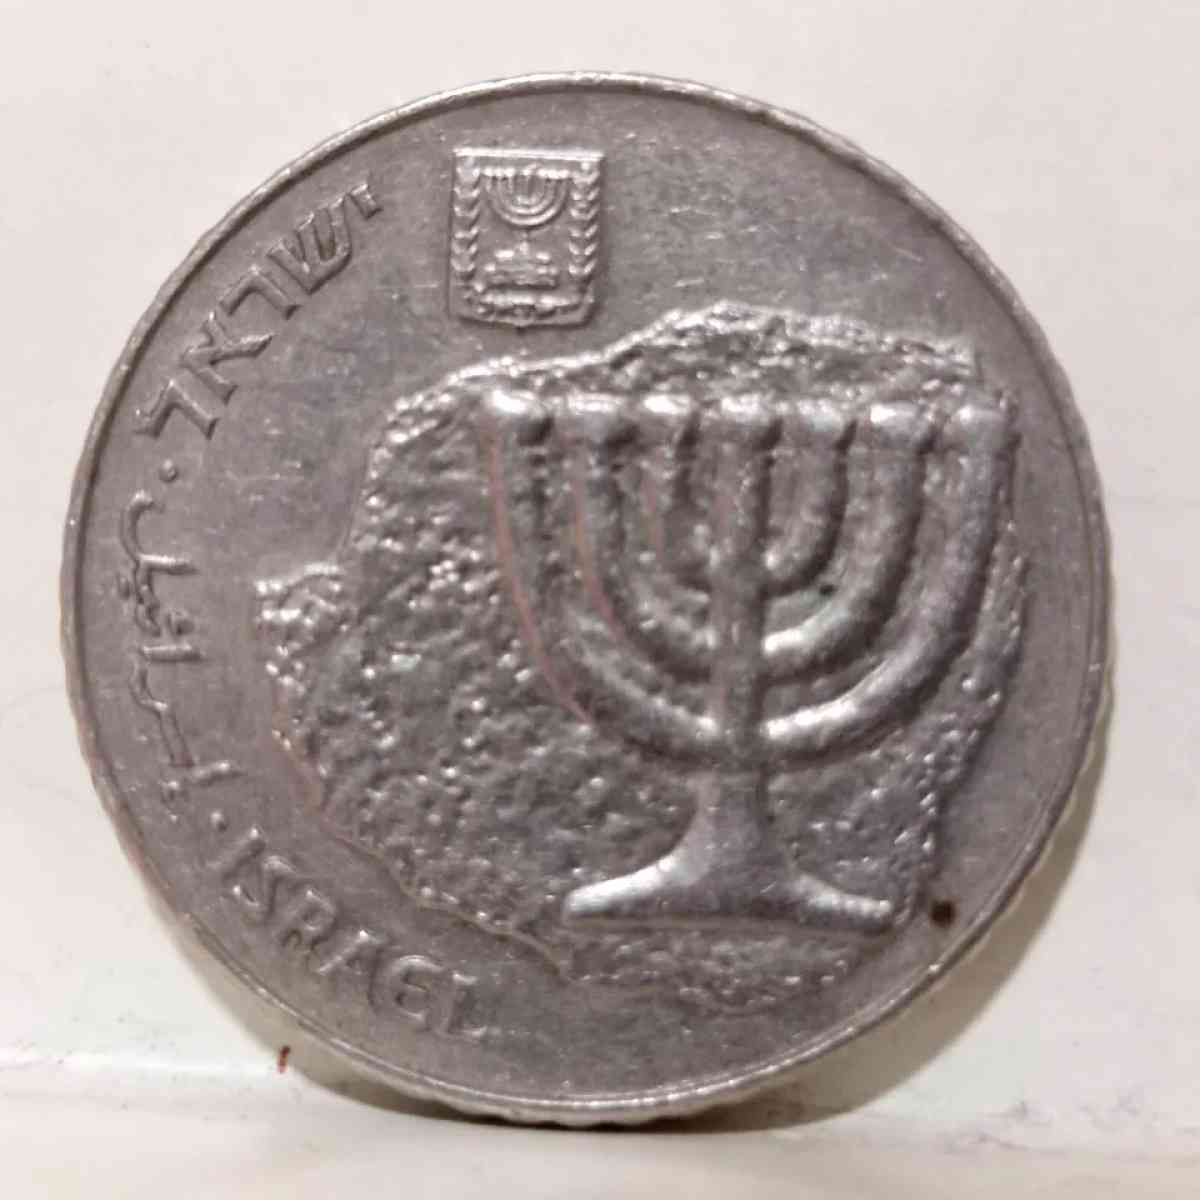 Vintage Israel 198485 100 Sheqalim coin Candlesticke Collect